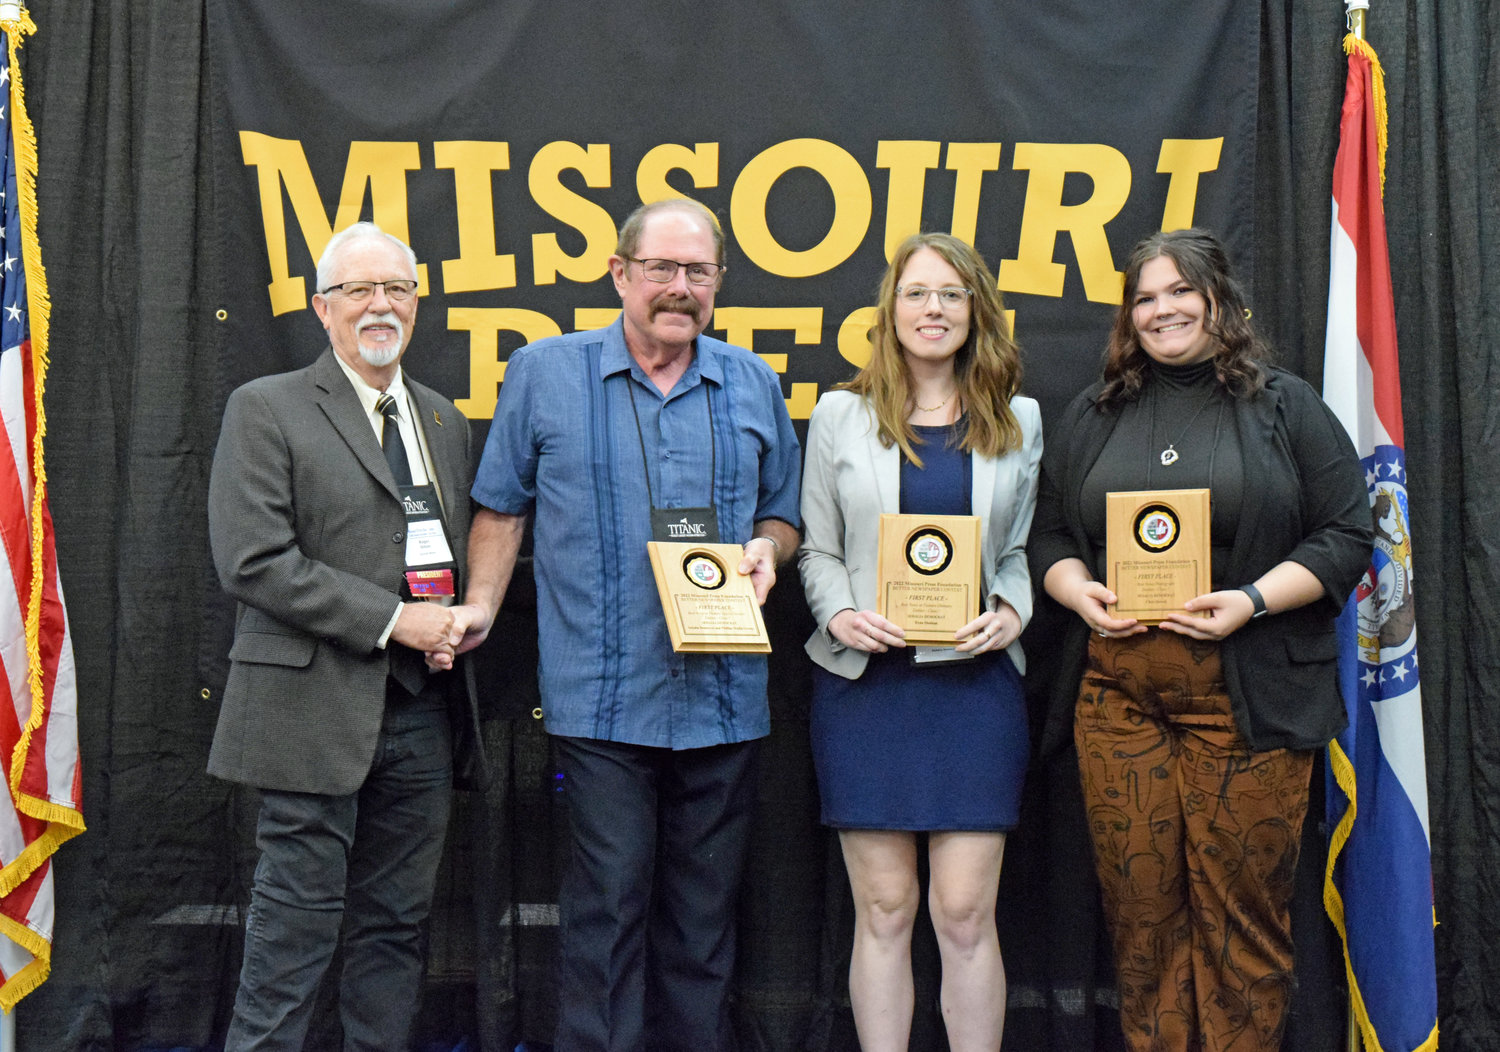 From left, Missouri Press Association President Roger Dillon, Democrat Publisher Jim Perry, Democrat Editor Nicole Cooke and Democrat reporter Skye Melcher pose for a photo during the awards luncheon at the MPA convention on Saturday, Sept. 17 in Lake Ozark.